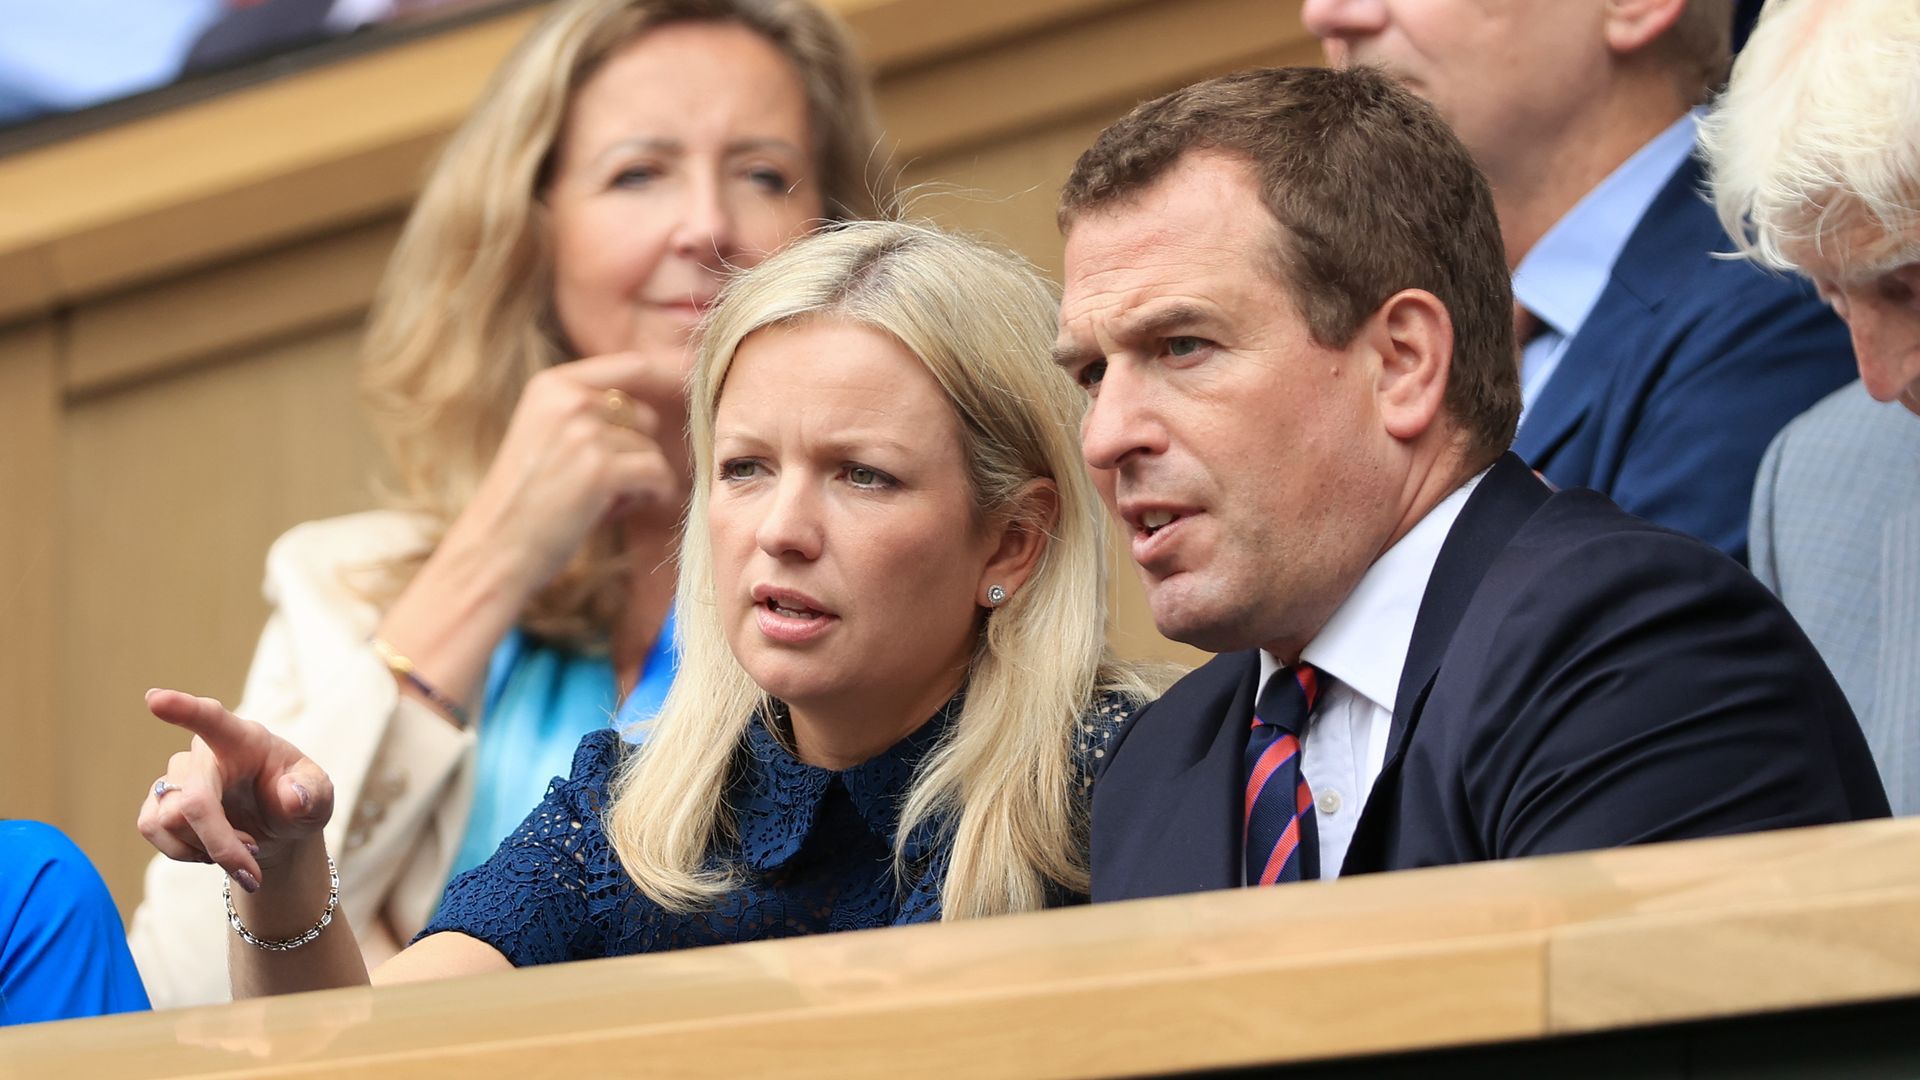 Linsday Wallace and Peter Phillips at the Wimbledon championships